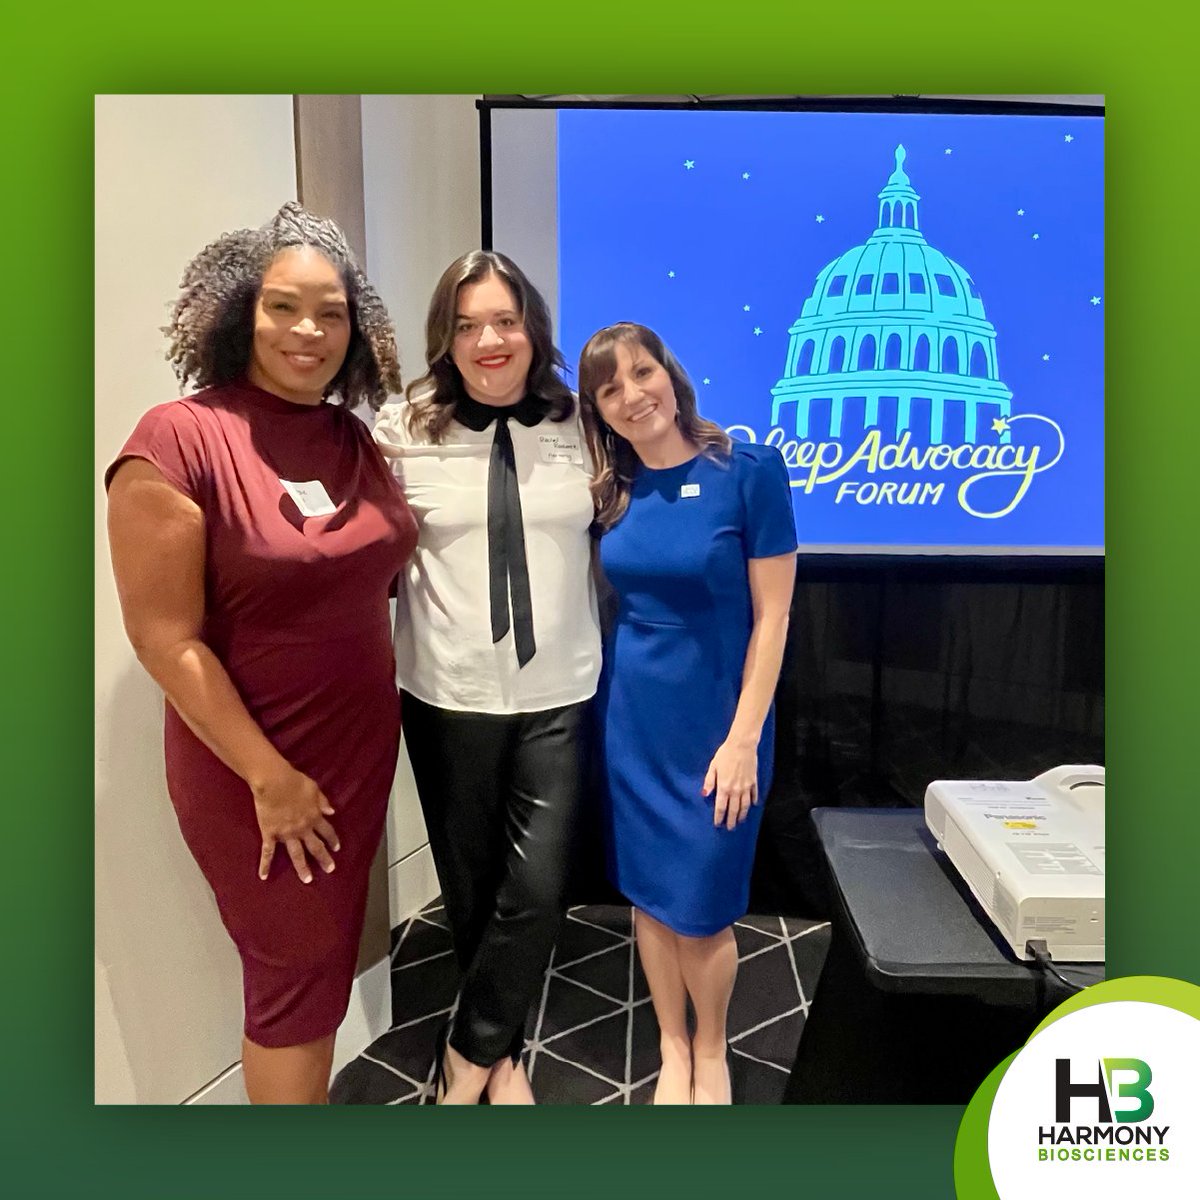 We had the opportunity to participate in the Sleep Advocacy Forum facilitated by @project_sleep. Thank you for continuing to inspire us. It’s always such a pleasure learning with #narcolepsy advocates and key leaders like our friend, Julie Flygare (@RemRunner). #RareNeuroCare